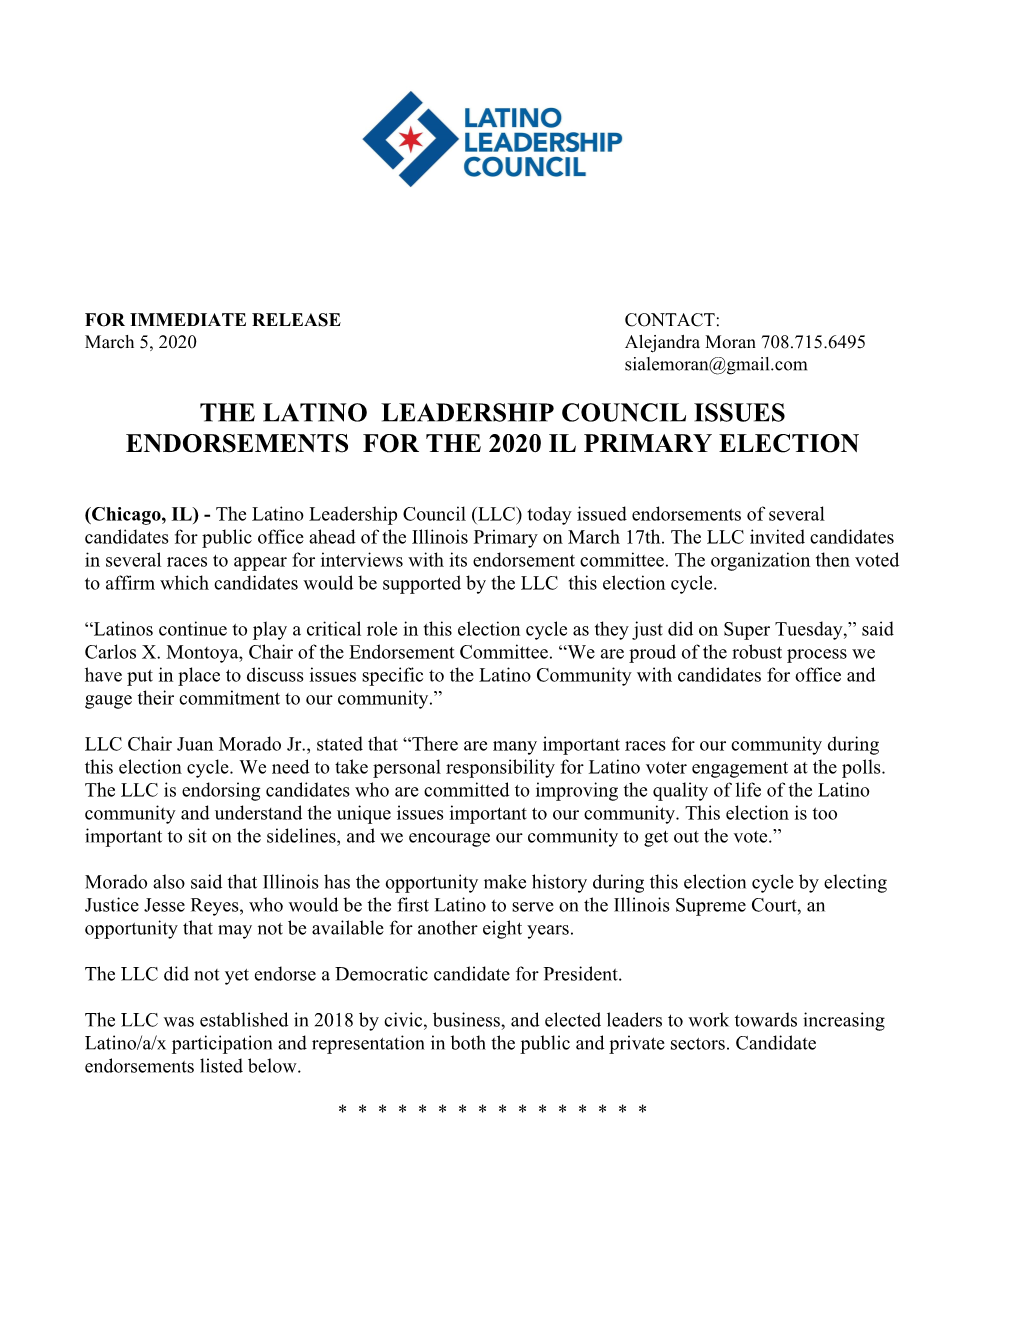 The Latino Leadership Council Issues Endorsements for the 2020 Il Primary Election